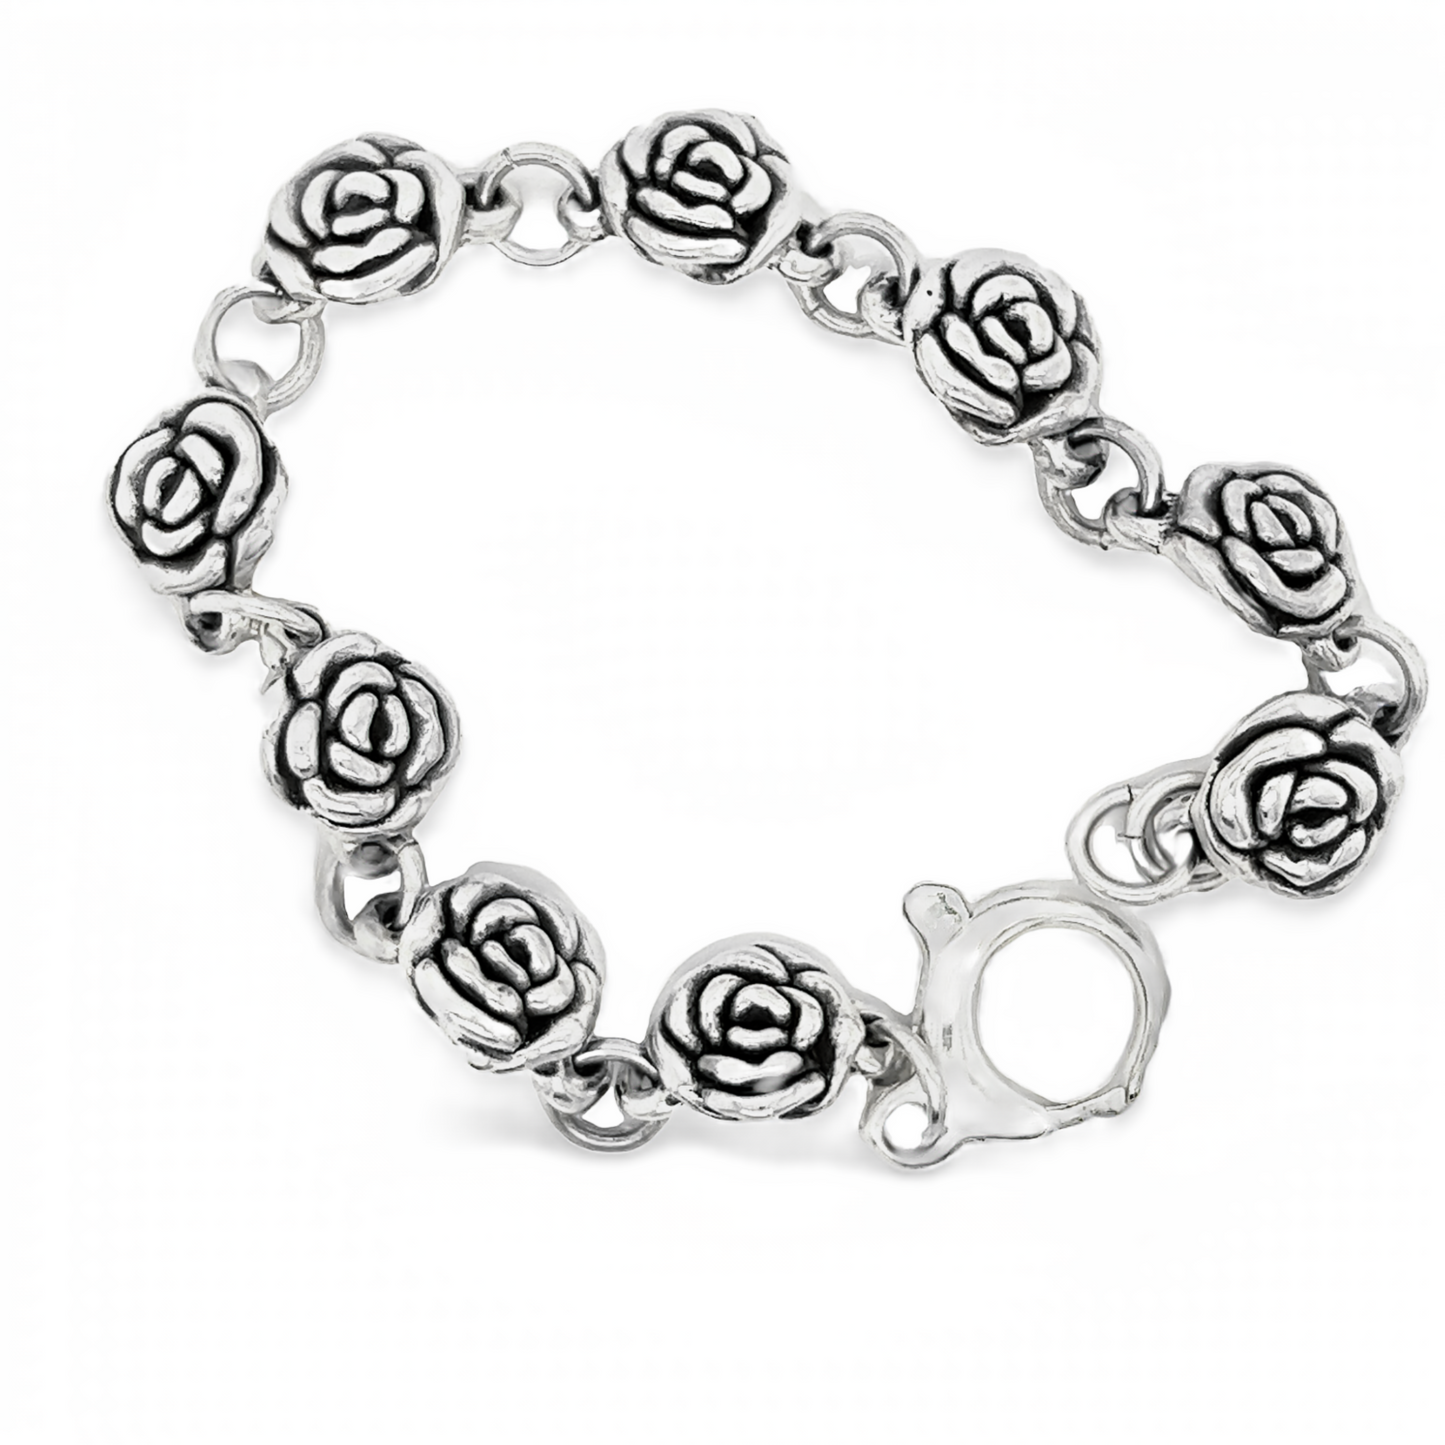 A Chic Link Rose Bracelet, a floral piece adorned with delicate roses in Super Silver.